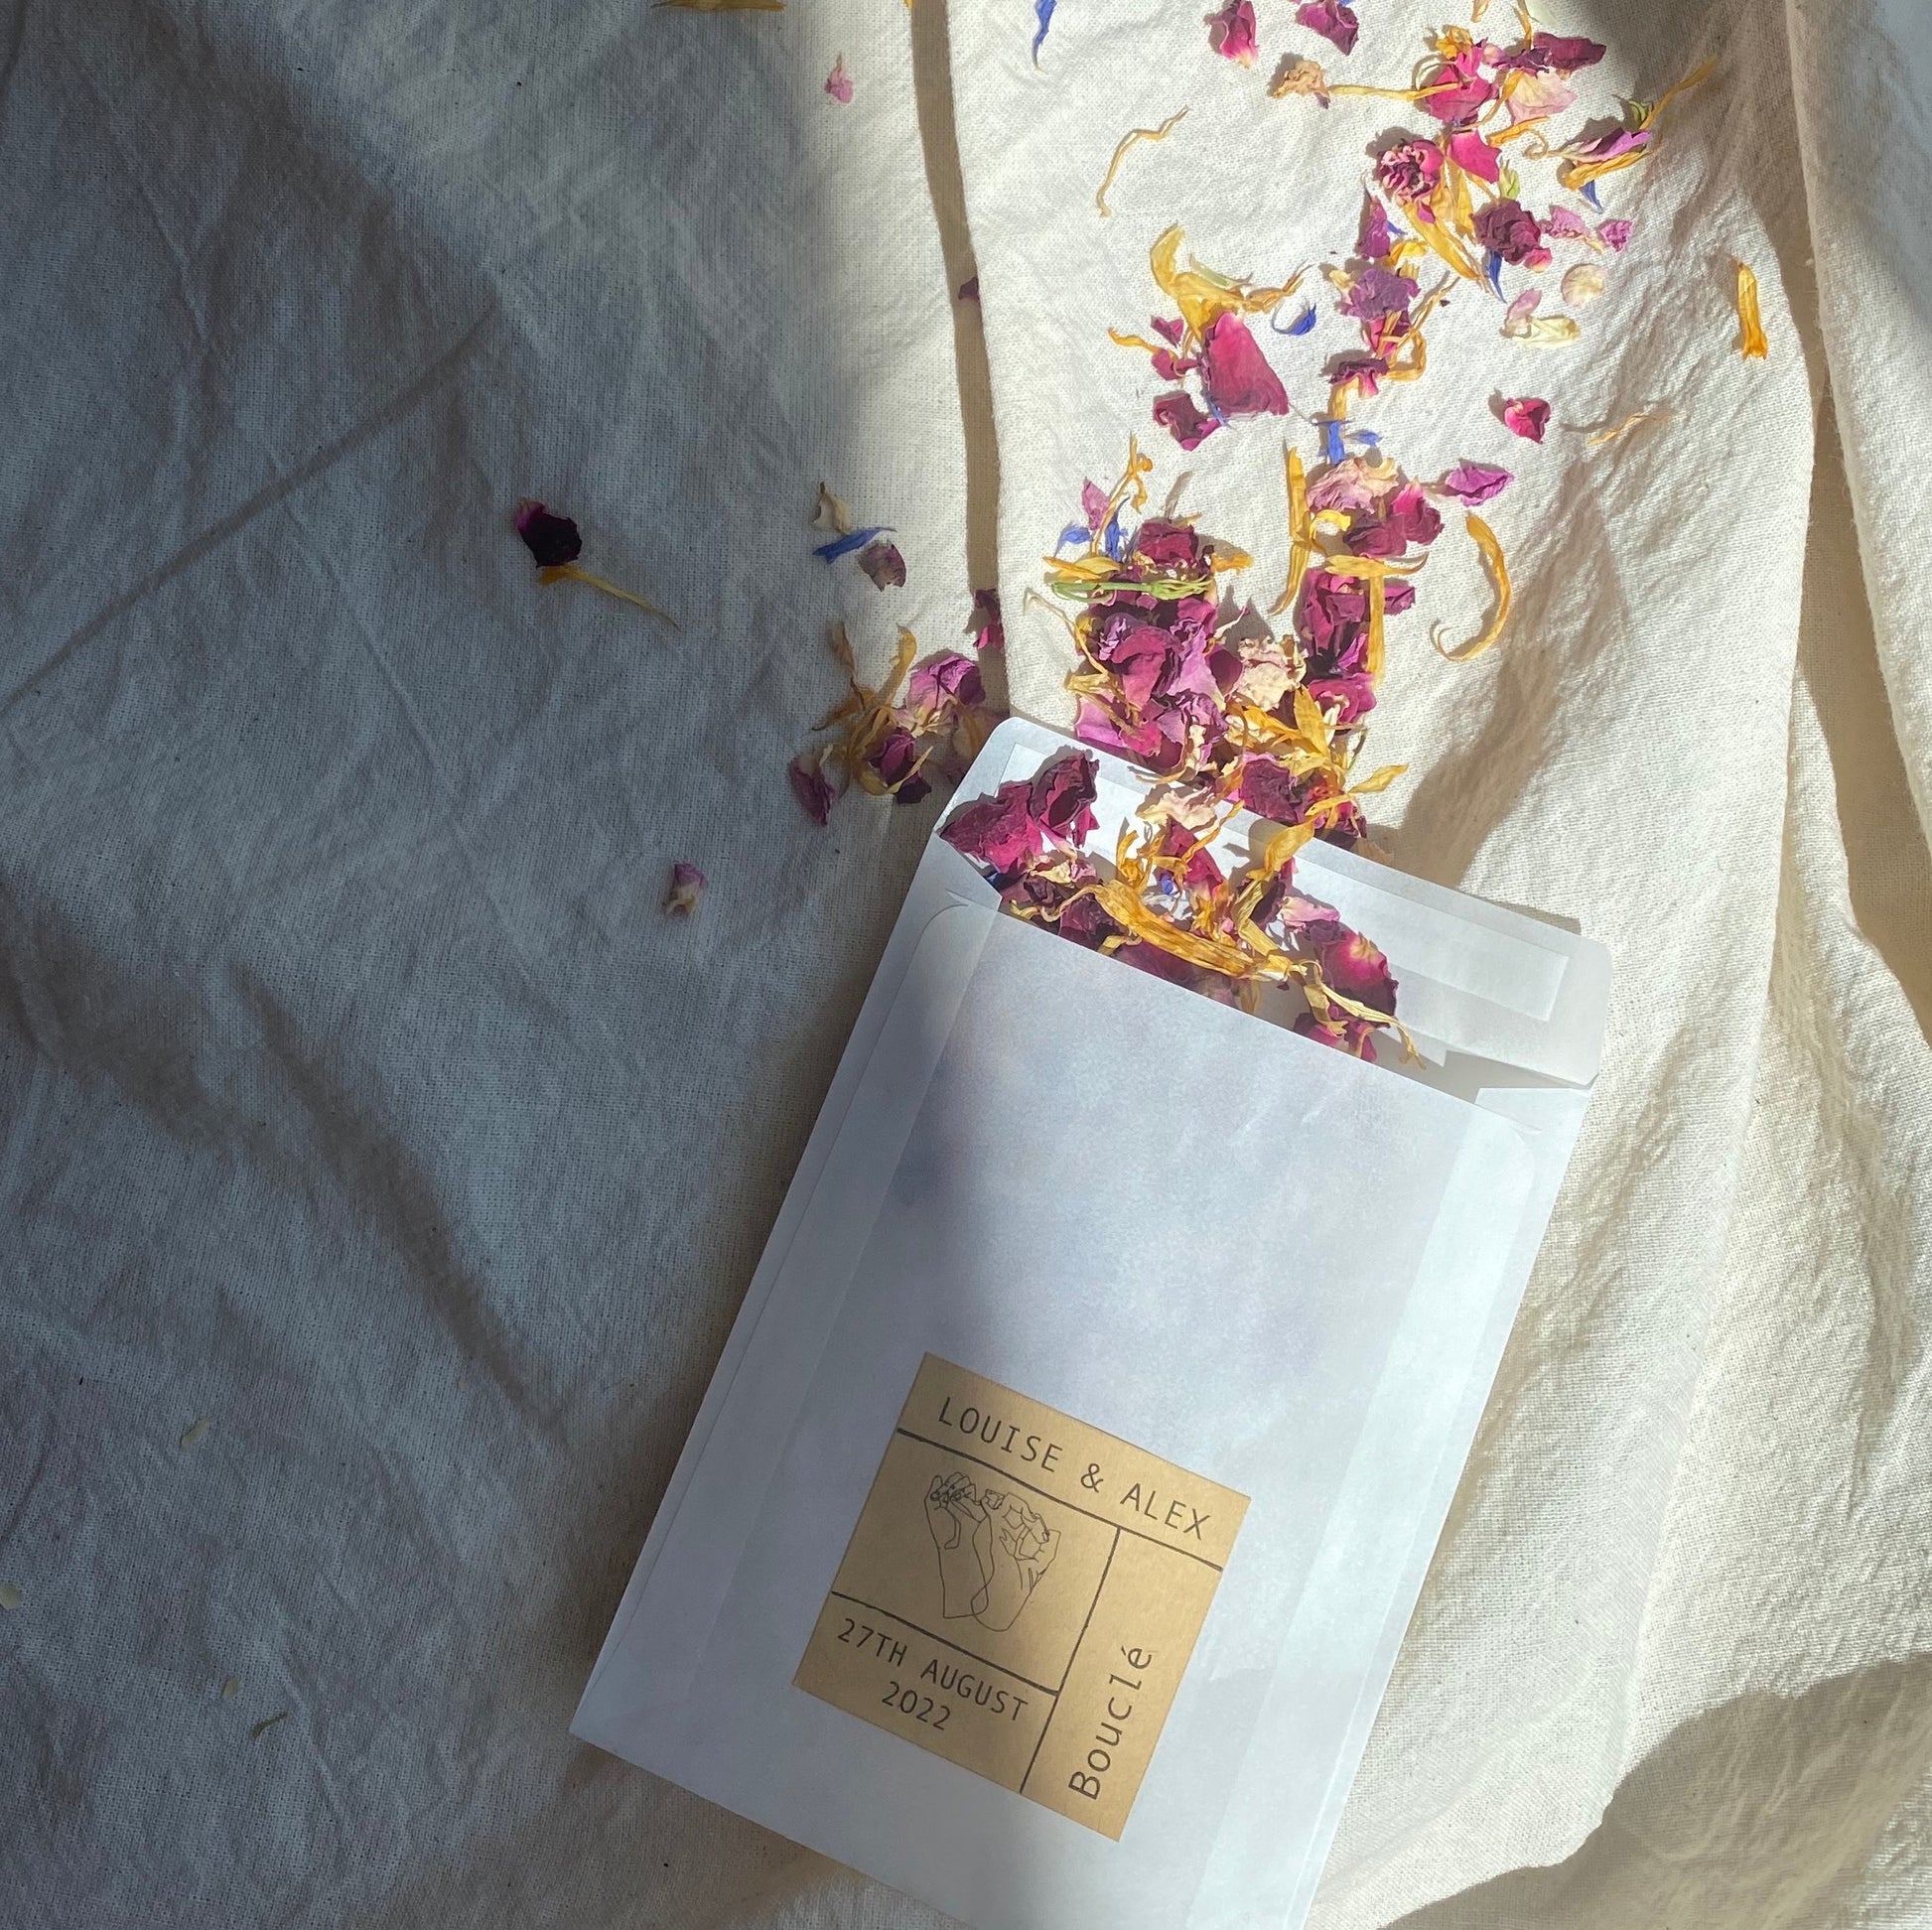 Dried real petal flower biodegradable natural wedding confetti pouch with a personalised label ideal for wedding styling. The petals are multicolour pink, yellow, purple and cream.